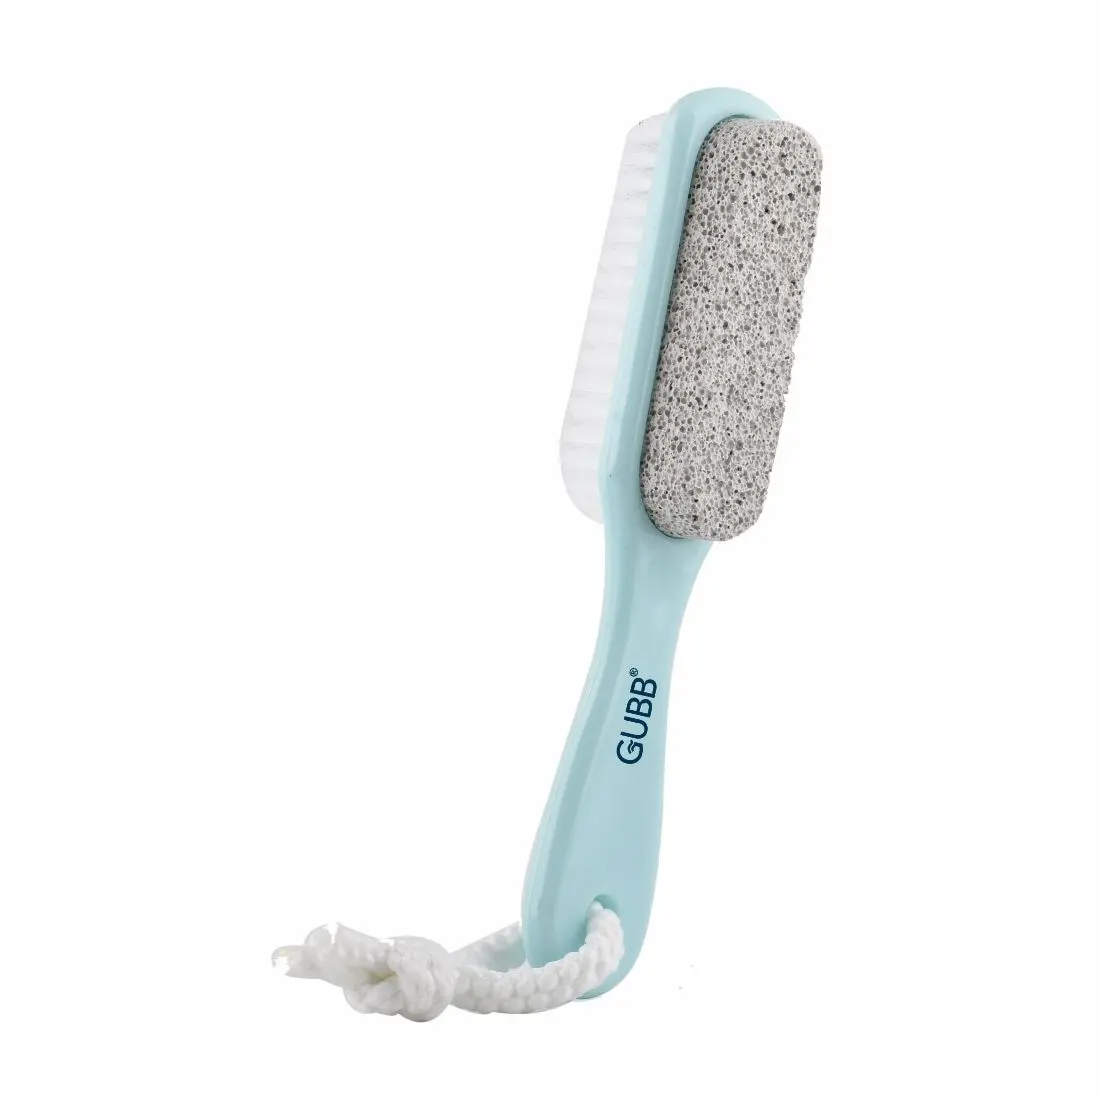 GUBB 2 In 1 Foot Brush With Pumice Stone